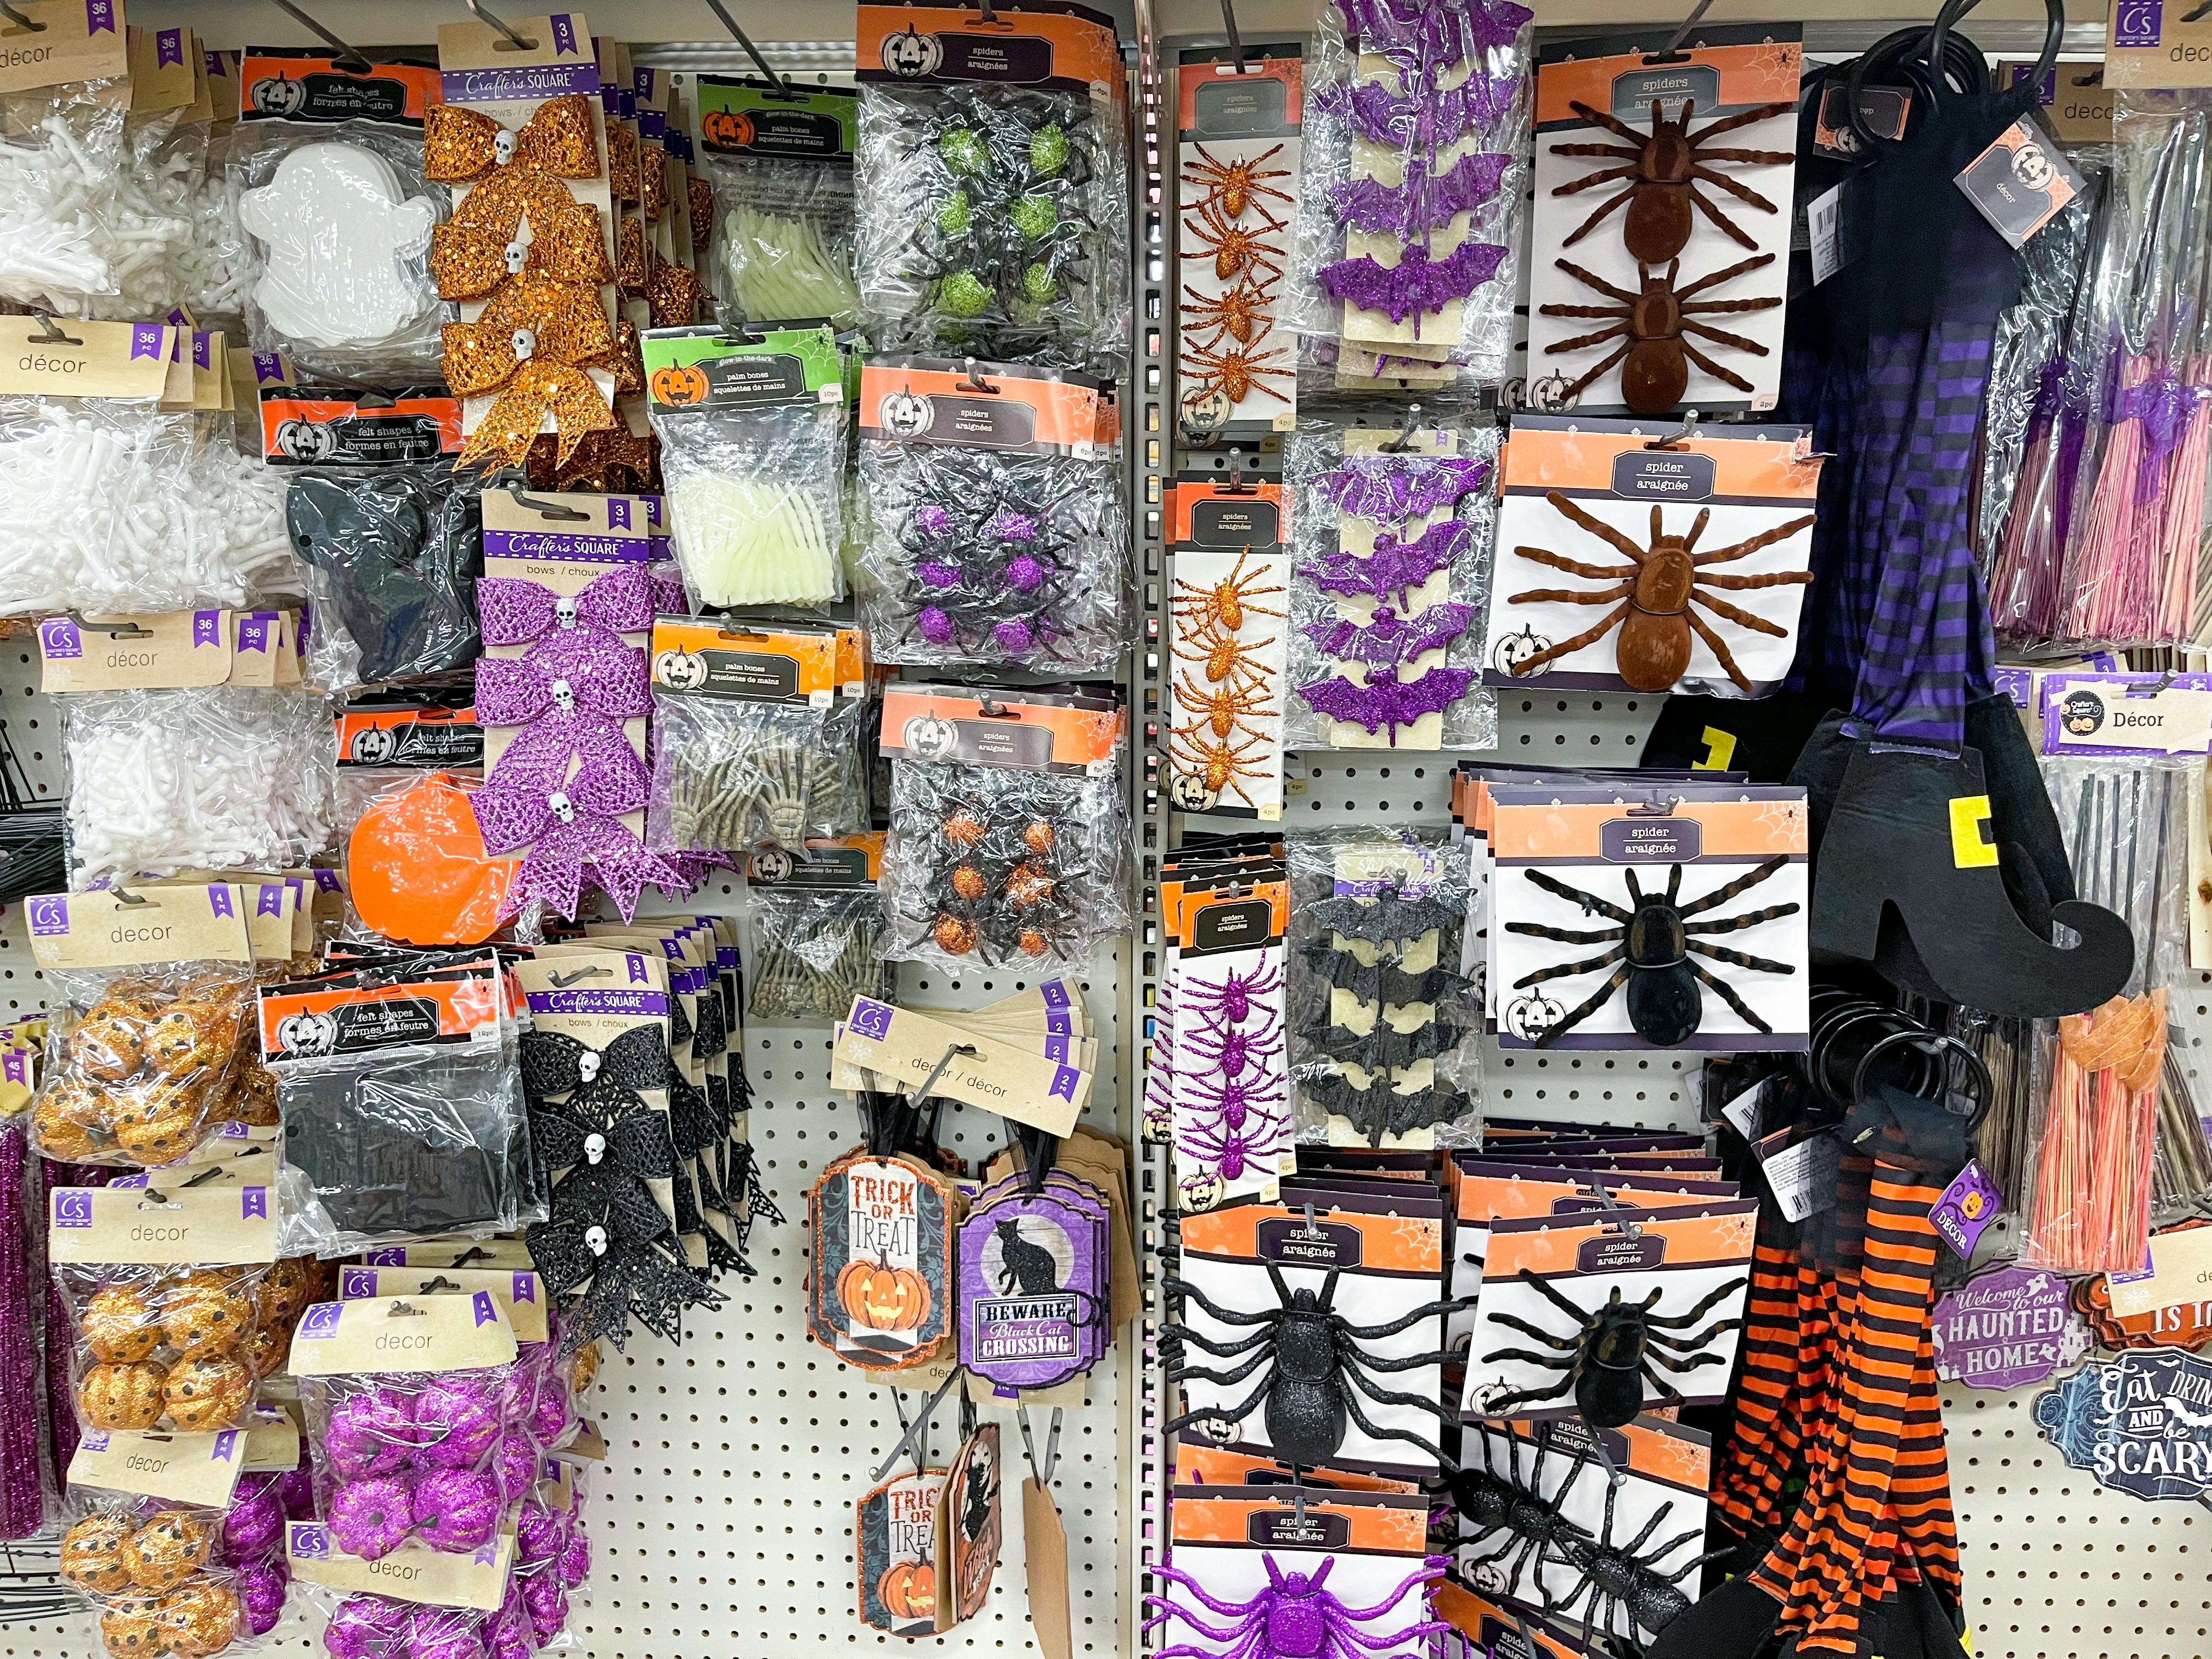 Craft supplies and Halloween decor for sale at dollar tree.